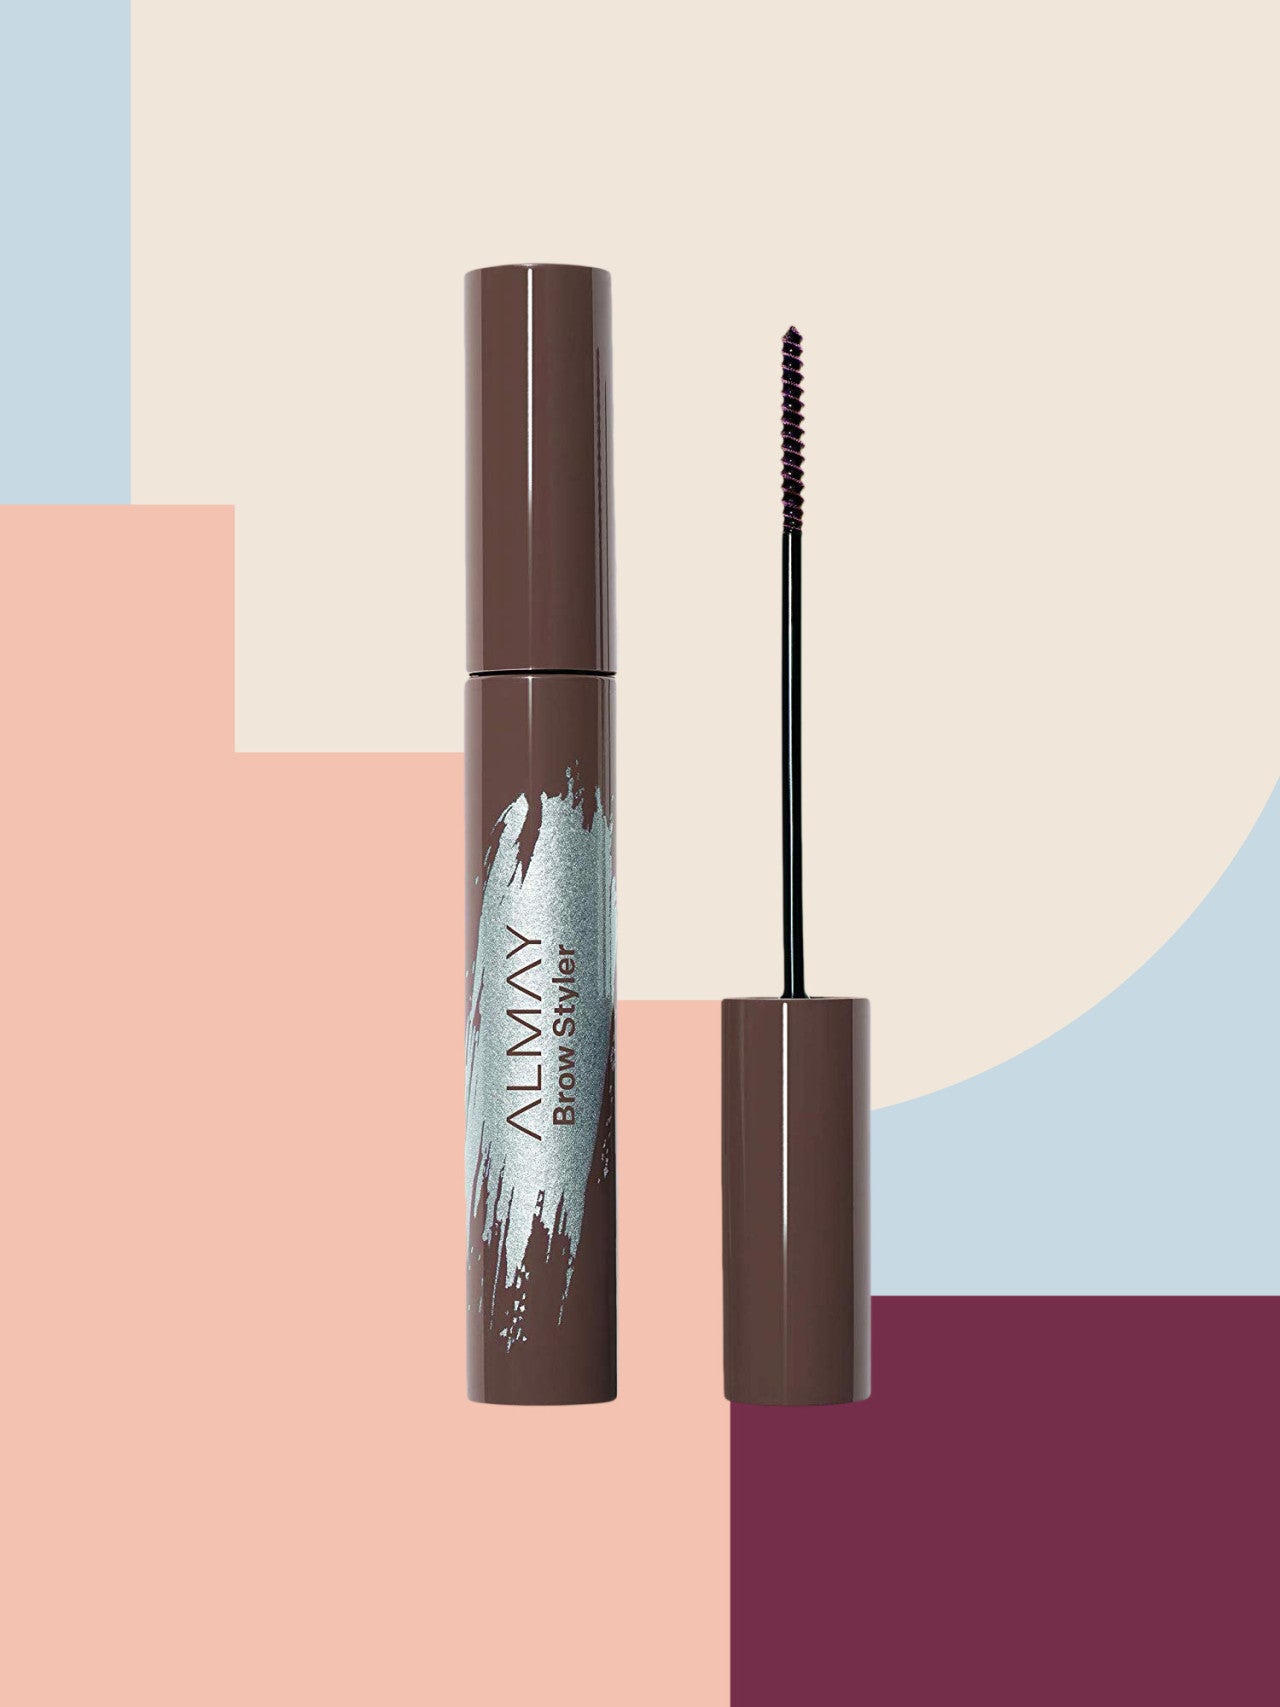 Hear Me Out: This $8 Drugstore Brow Gel Is the Best on the Market